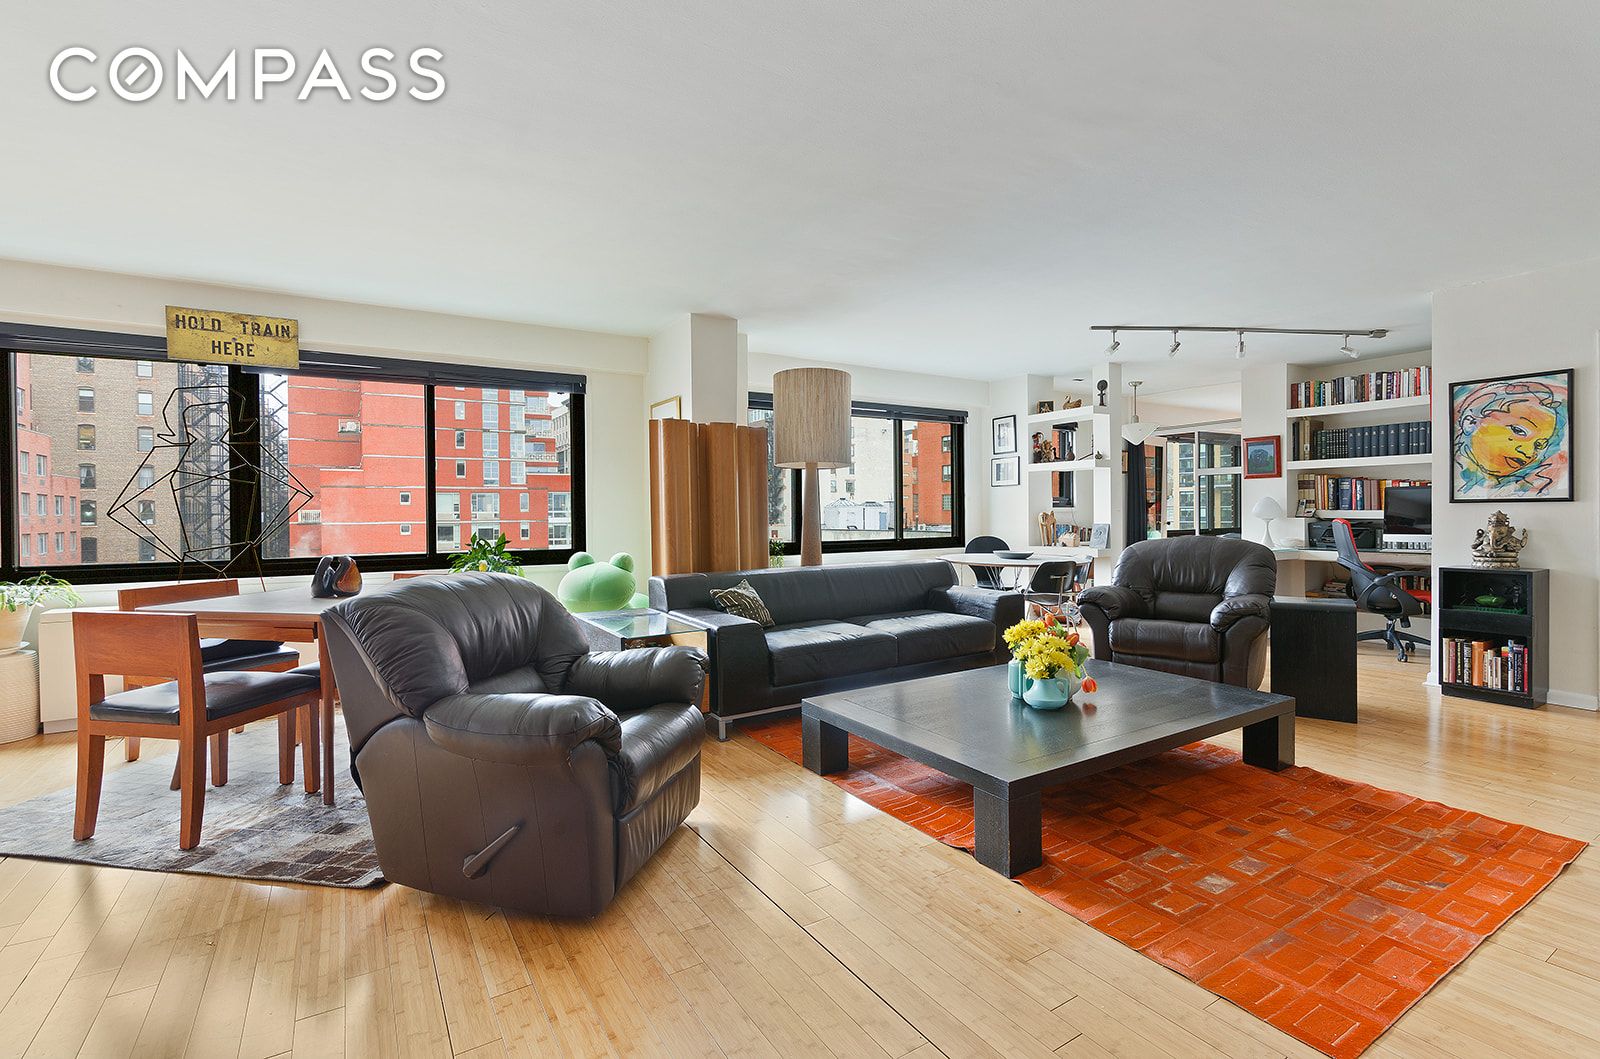 201 West 21st Street 10Cde, Chelsea, Downtown, NYC - 2 Bedrooms  
3 Bathrooms  
4 Rooms - 